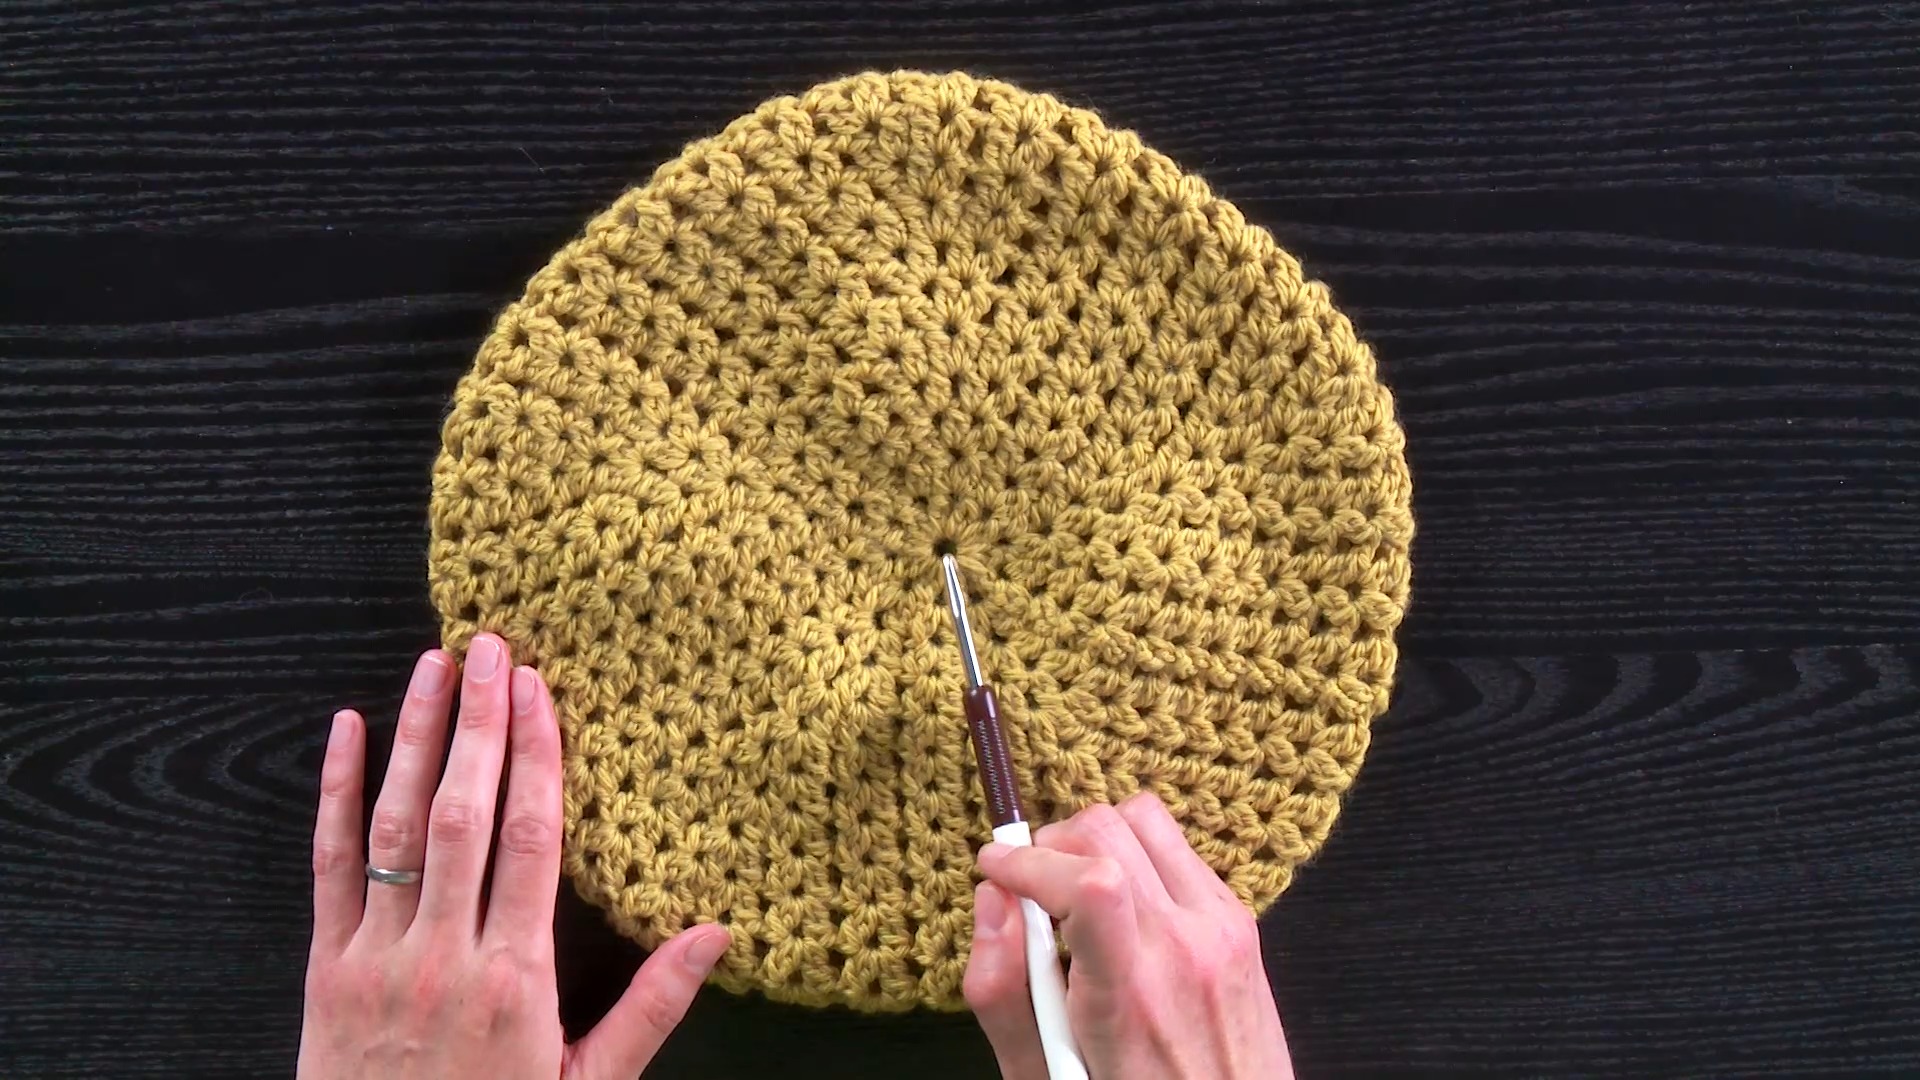 Session 4: Circles & Shaping: Patterned Beret